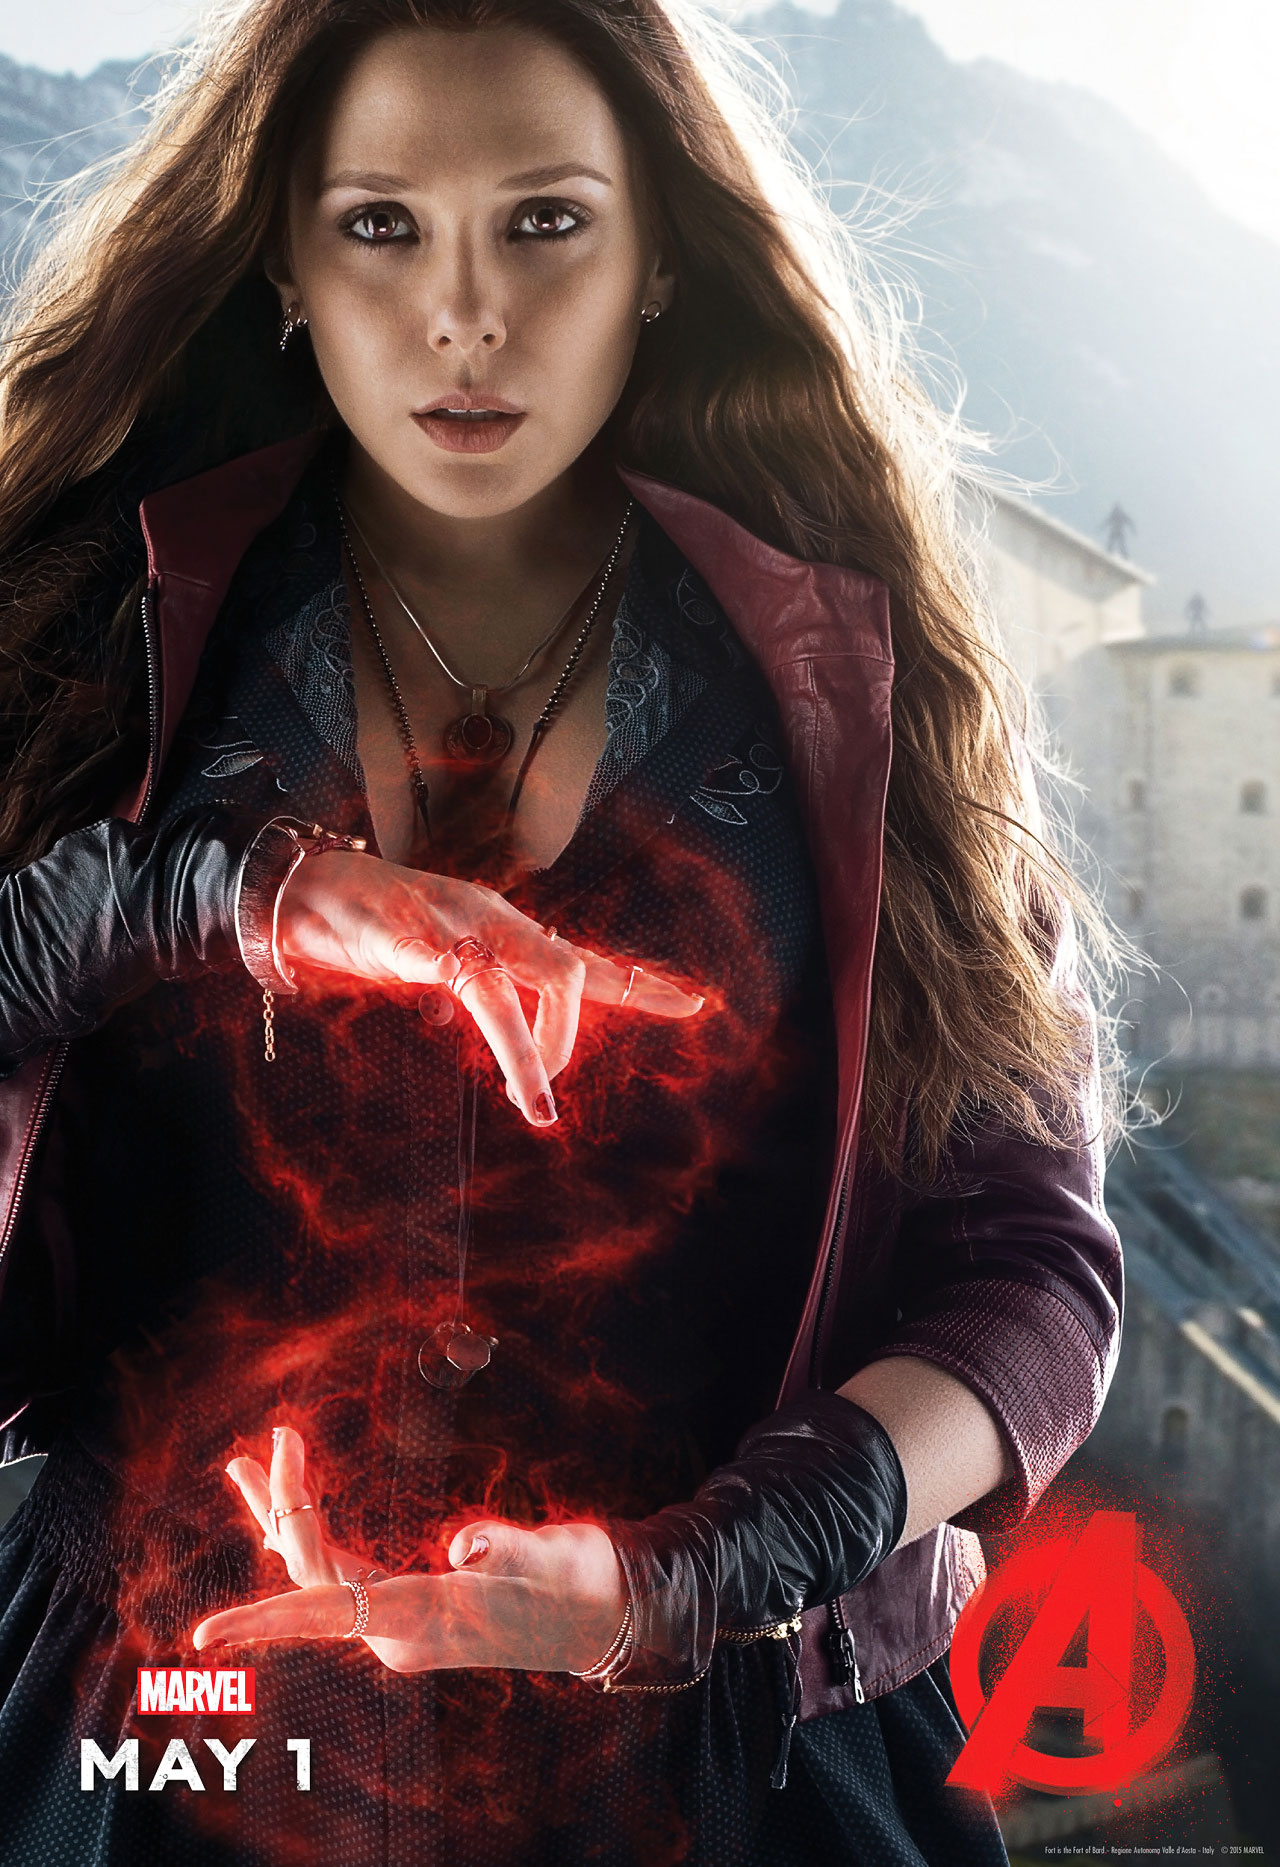  of Ultron posters featuring Scarlet Witch and Quicksilver EWcom